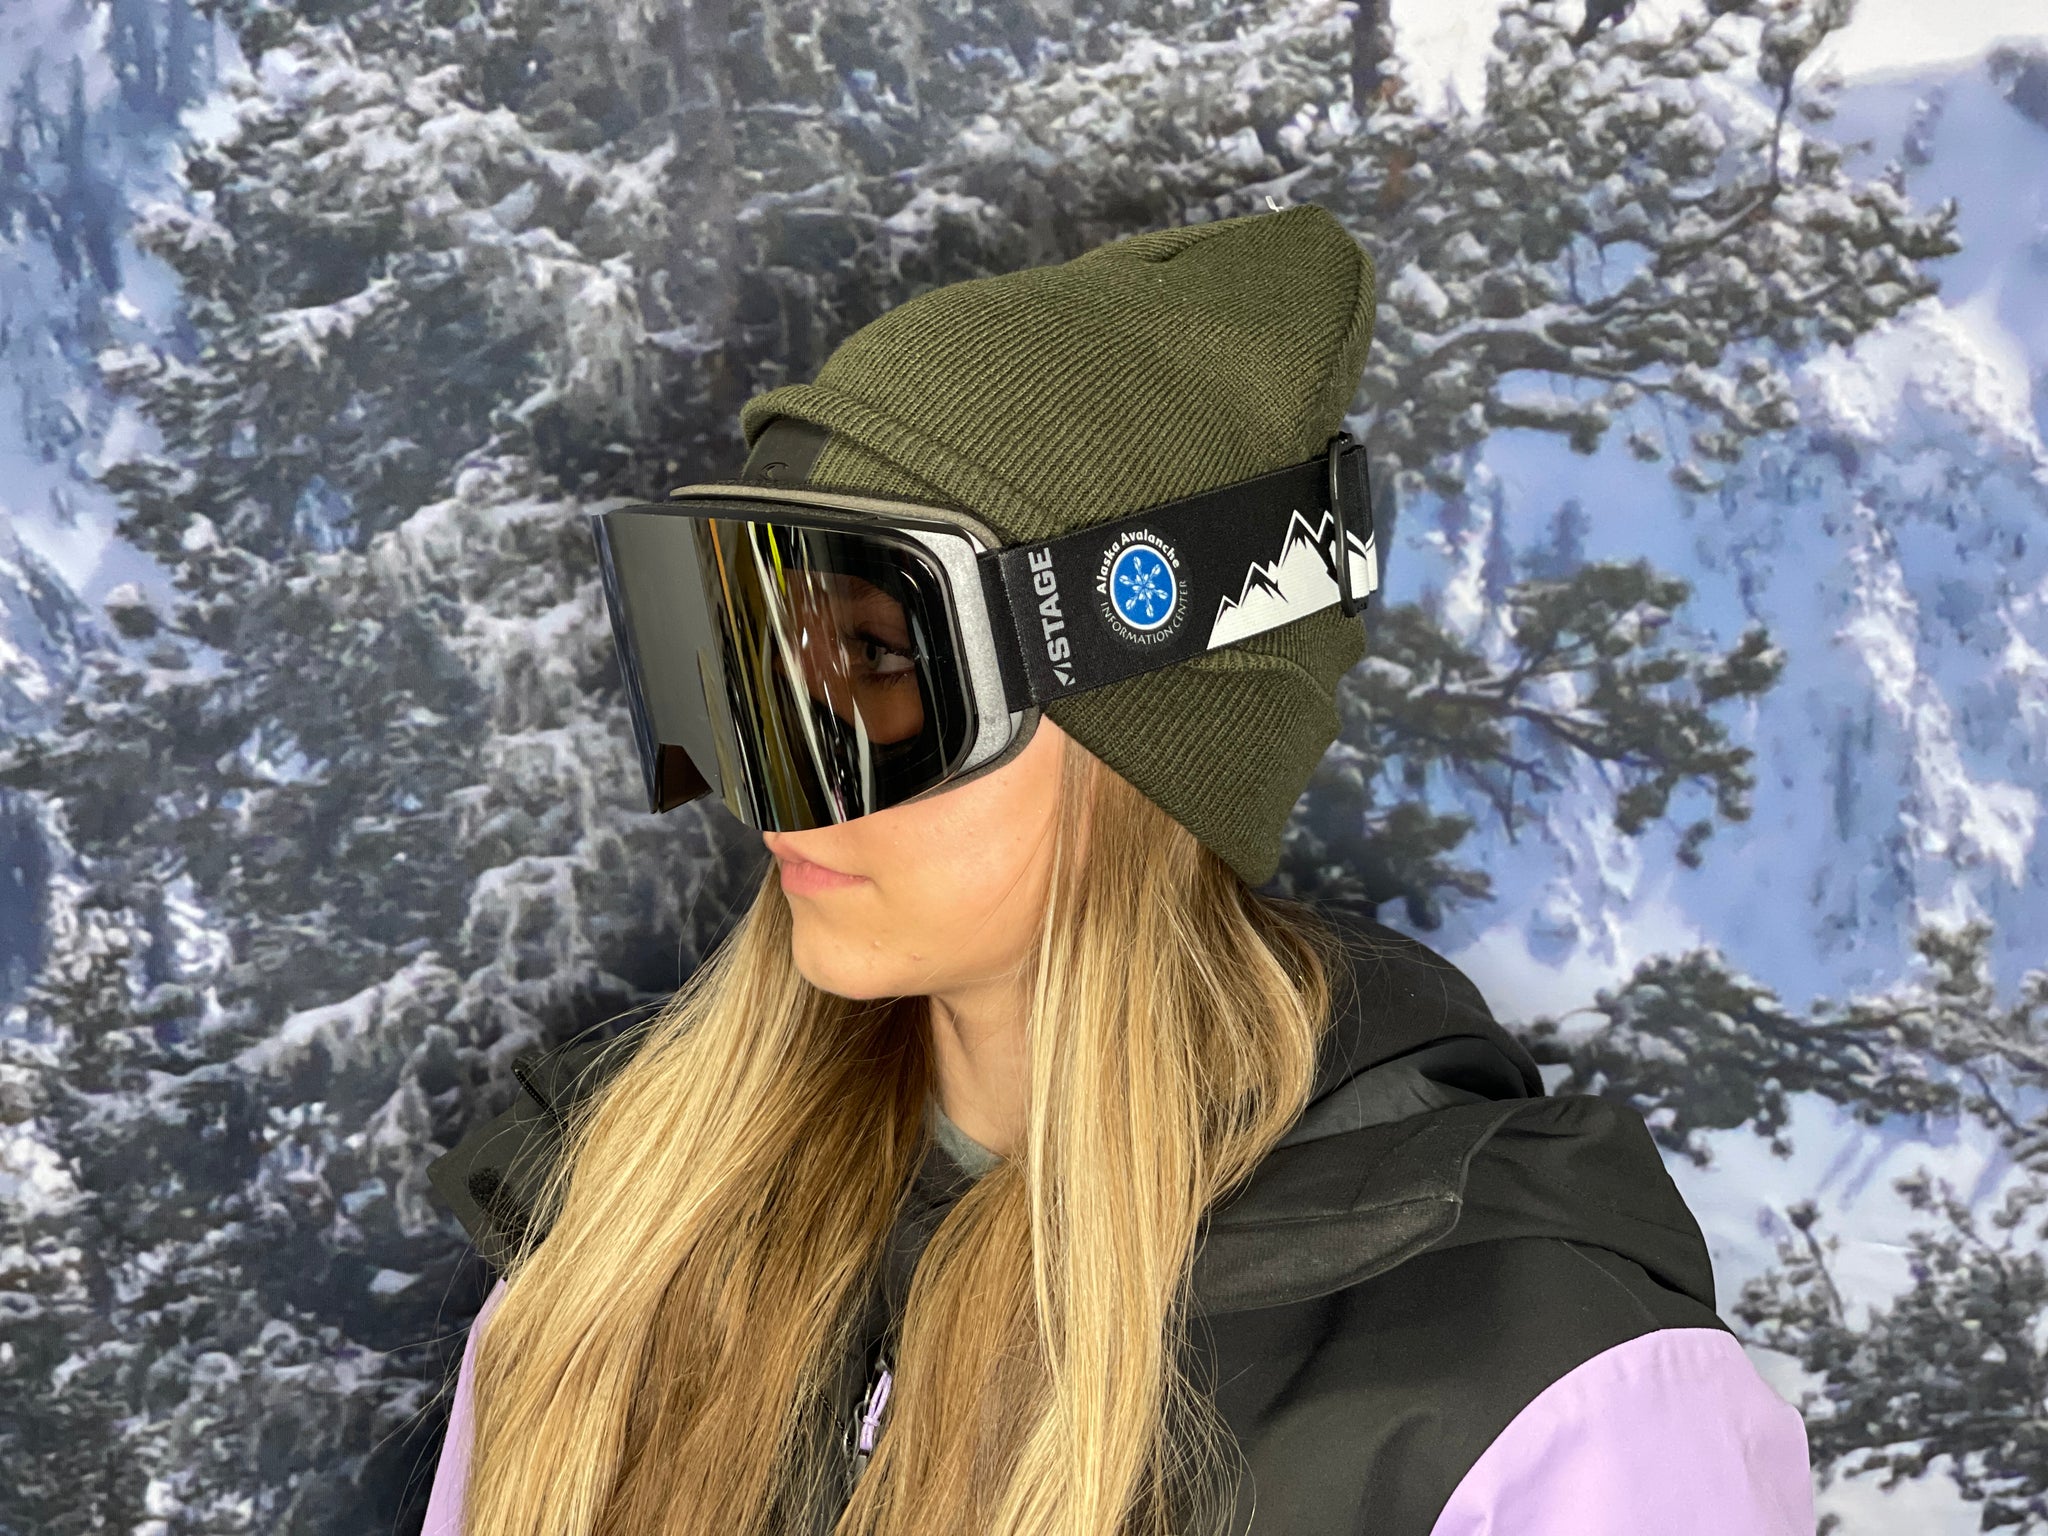 Woman wearing a pair of STAGE Cusotm Ski Goggles featuring the Alaska Avalanche Information Center logo on the STAGE Propnetic Magnetic Ski goggles